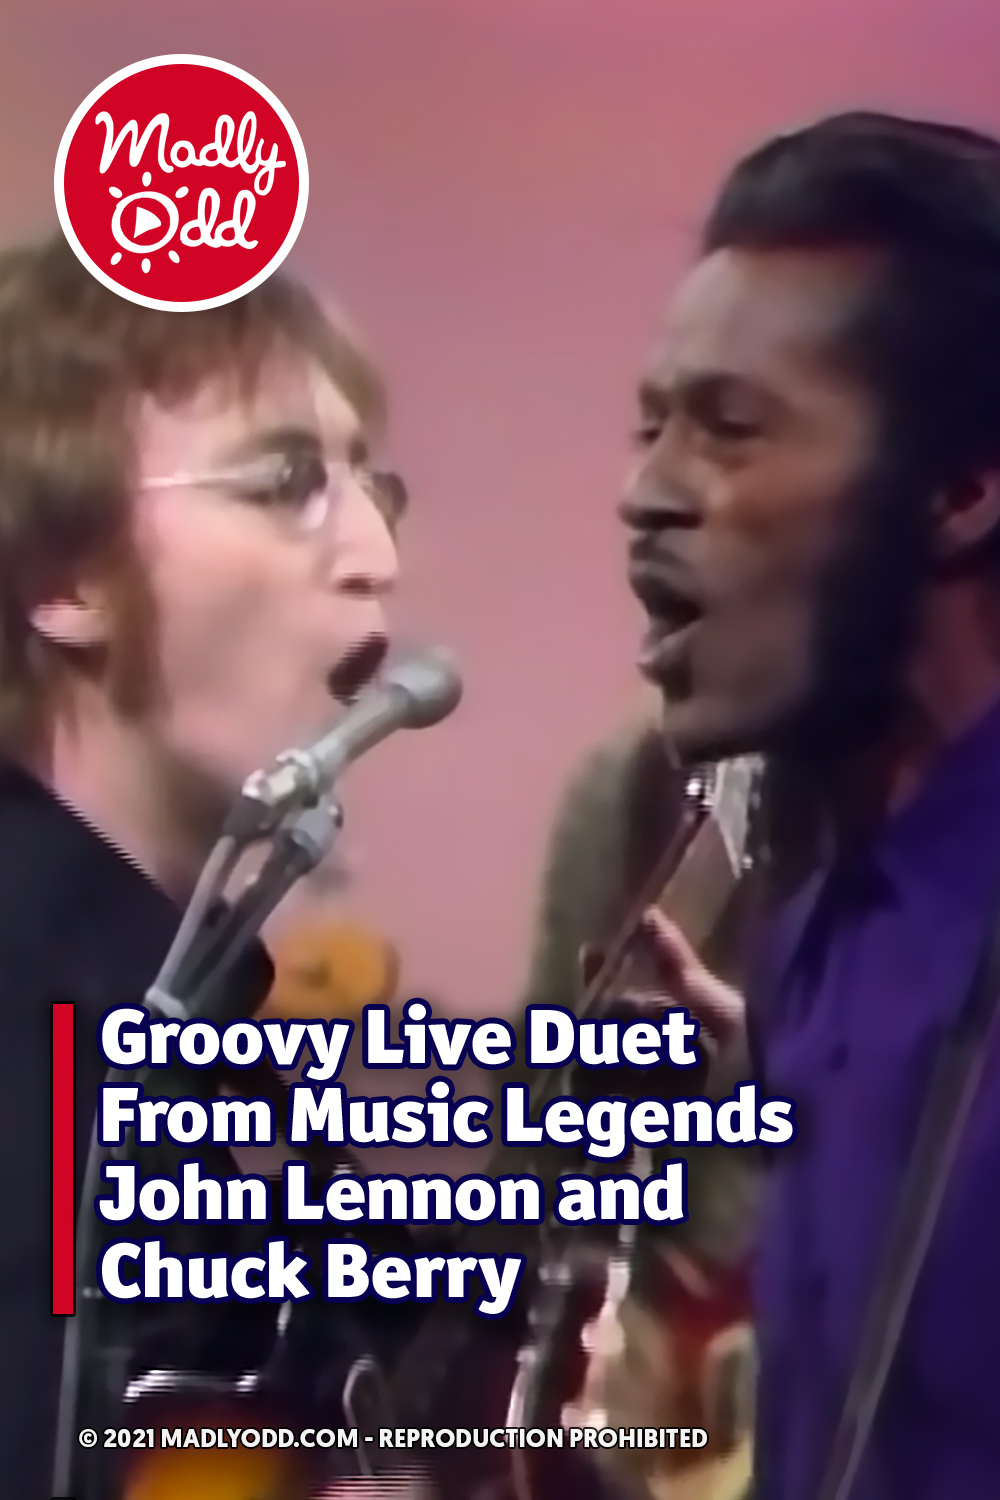 Groovy Live Duet From Music Legends John Lennon and Chuck Berry